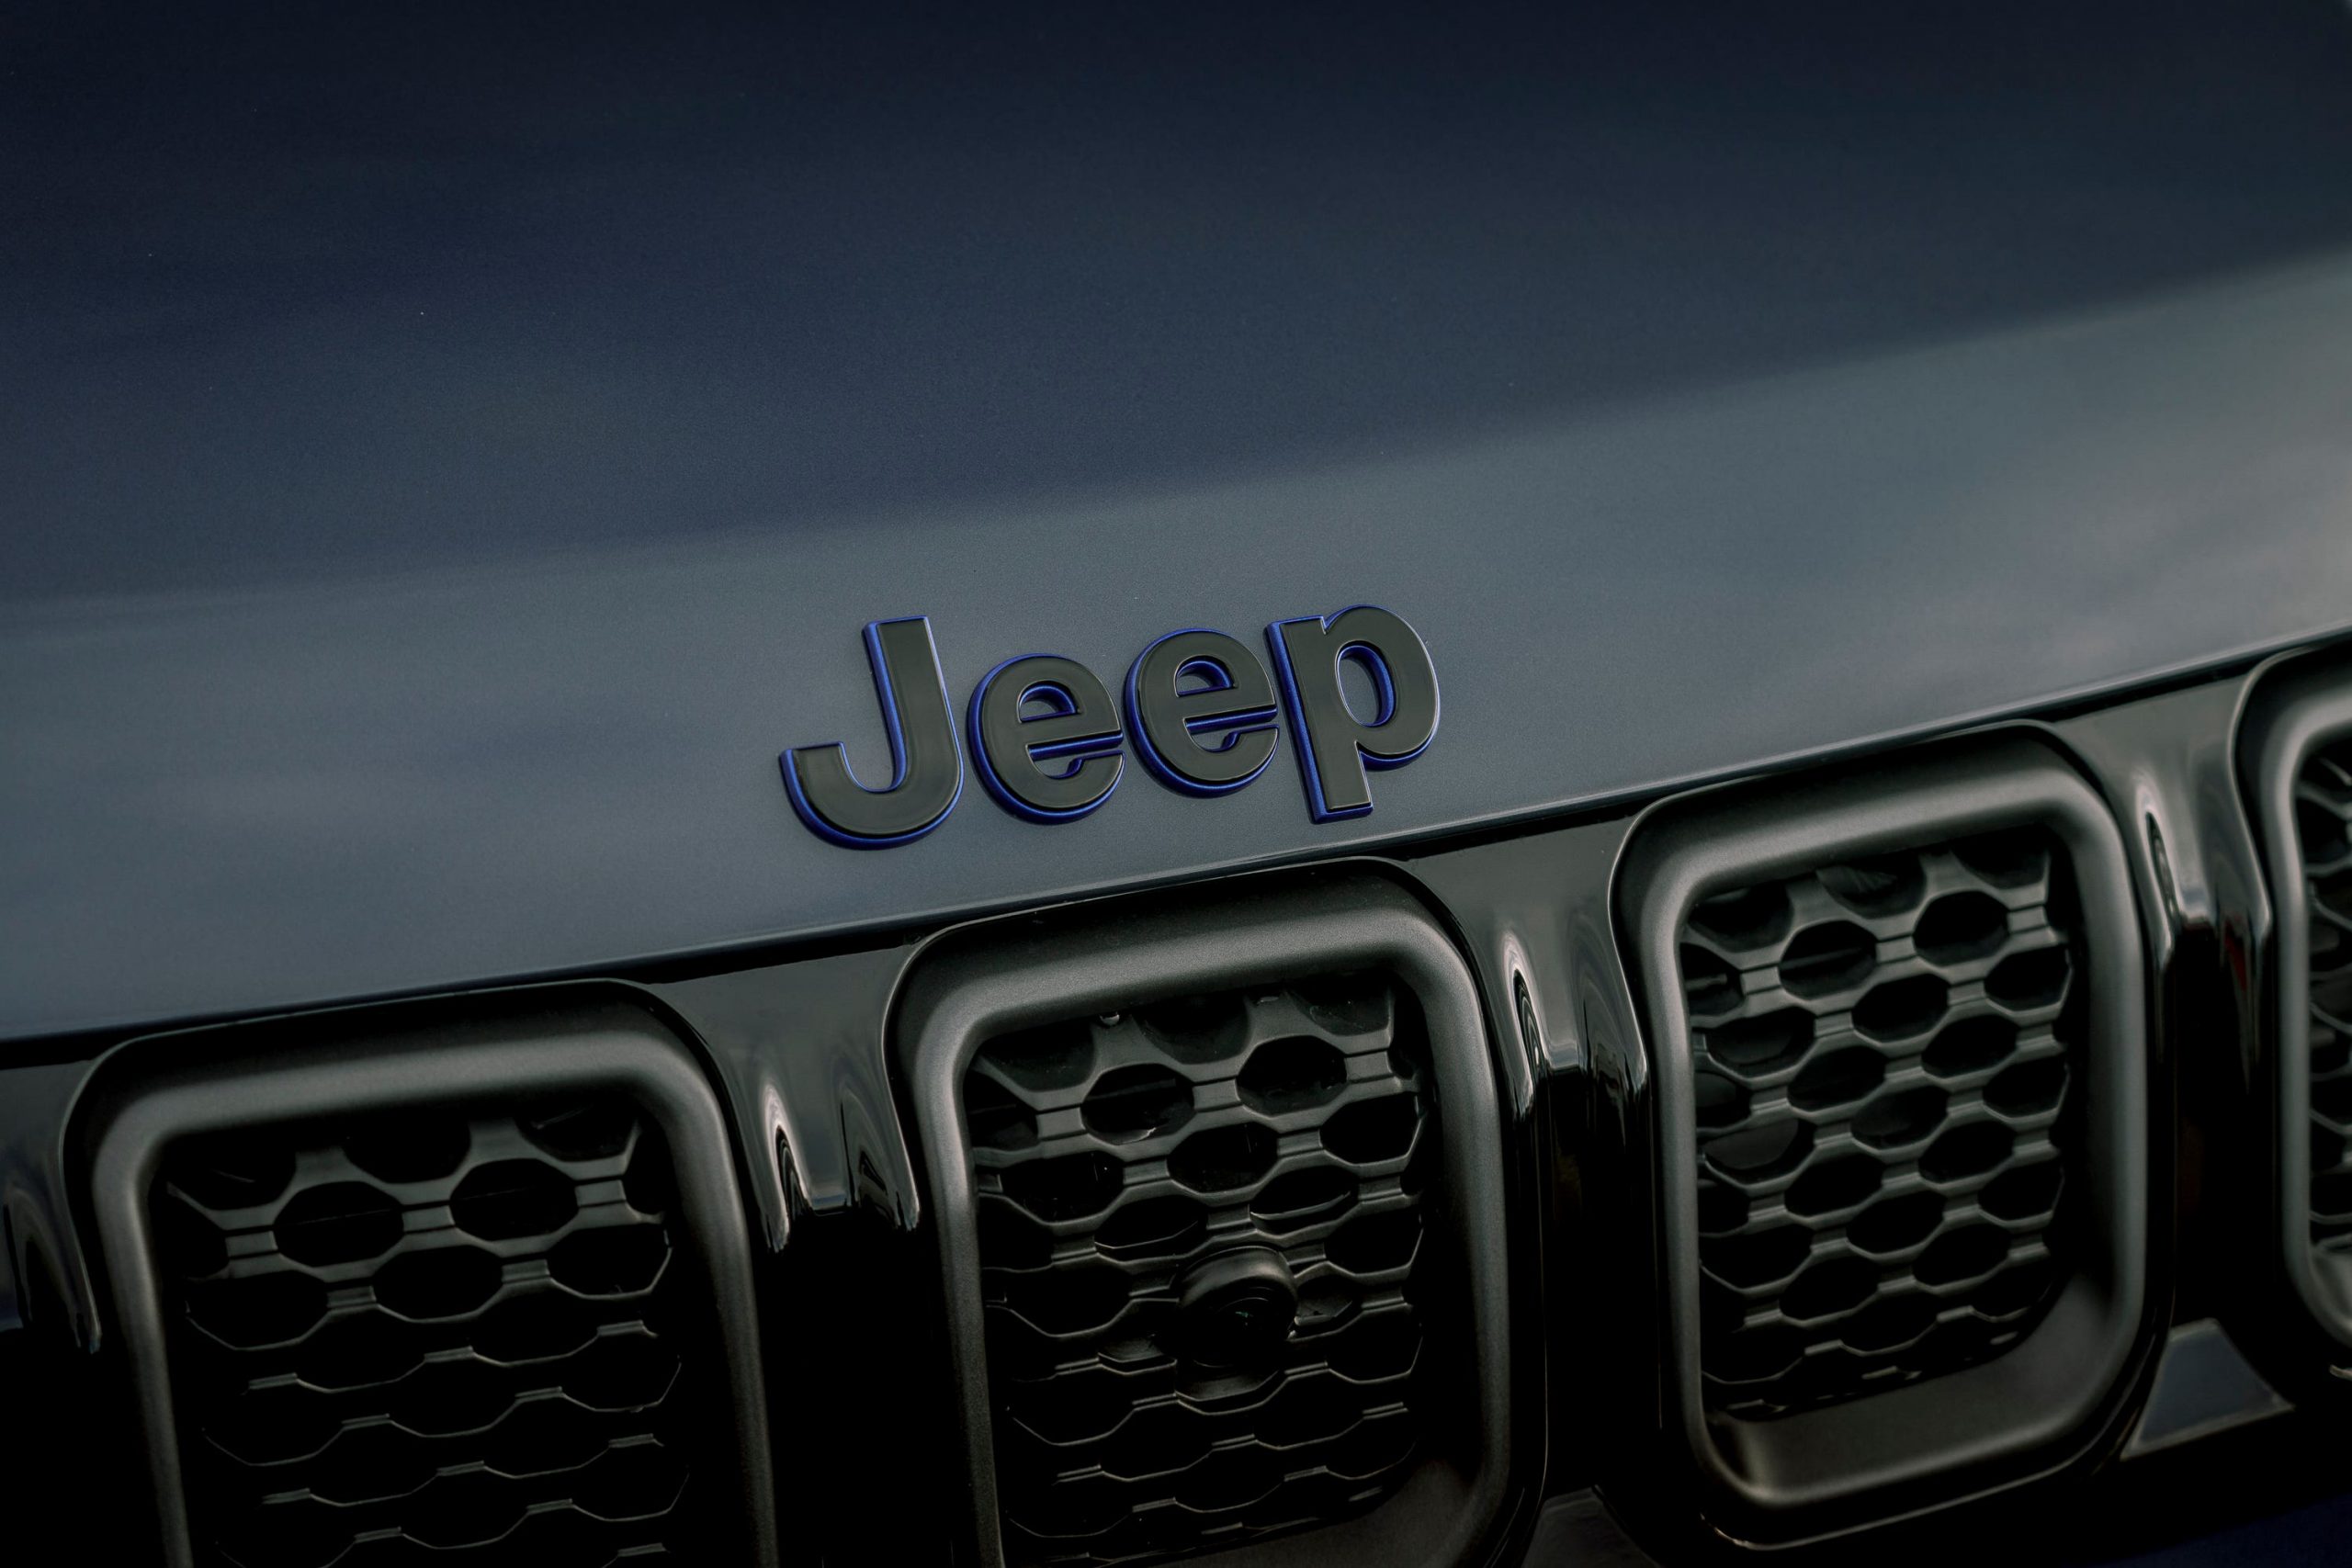 Jeep logo on the front of the new Compass